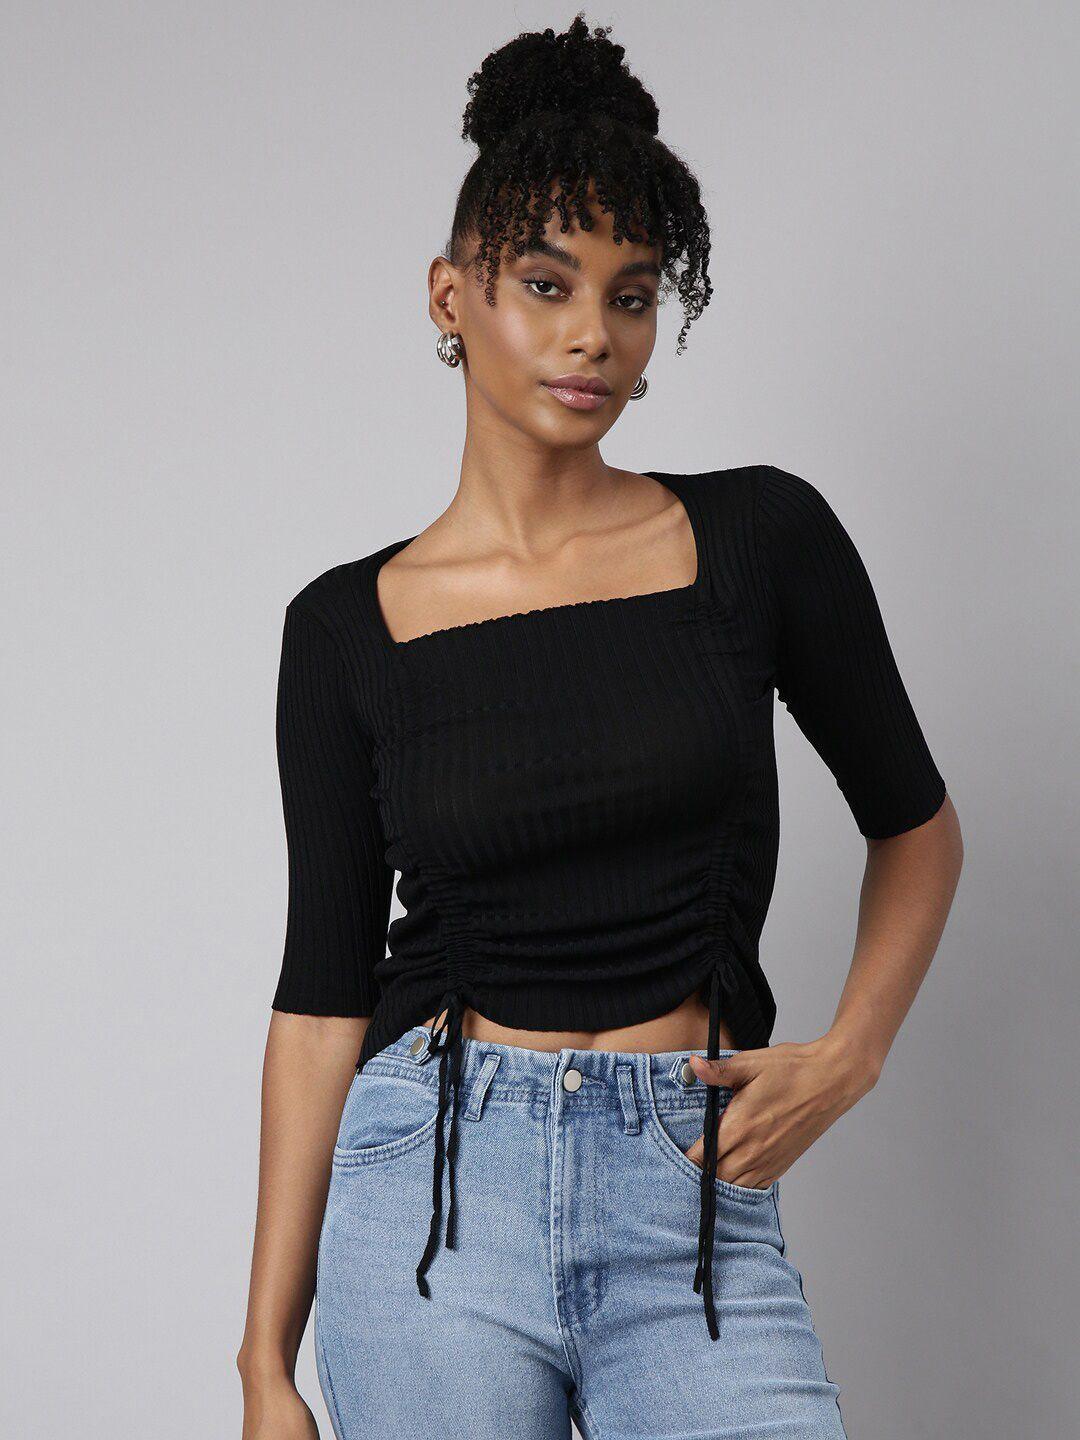 showoff-short-sleeves-self-design-square-neck-fitted-ruched-crop-top